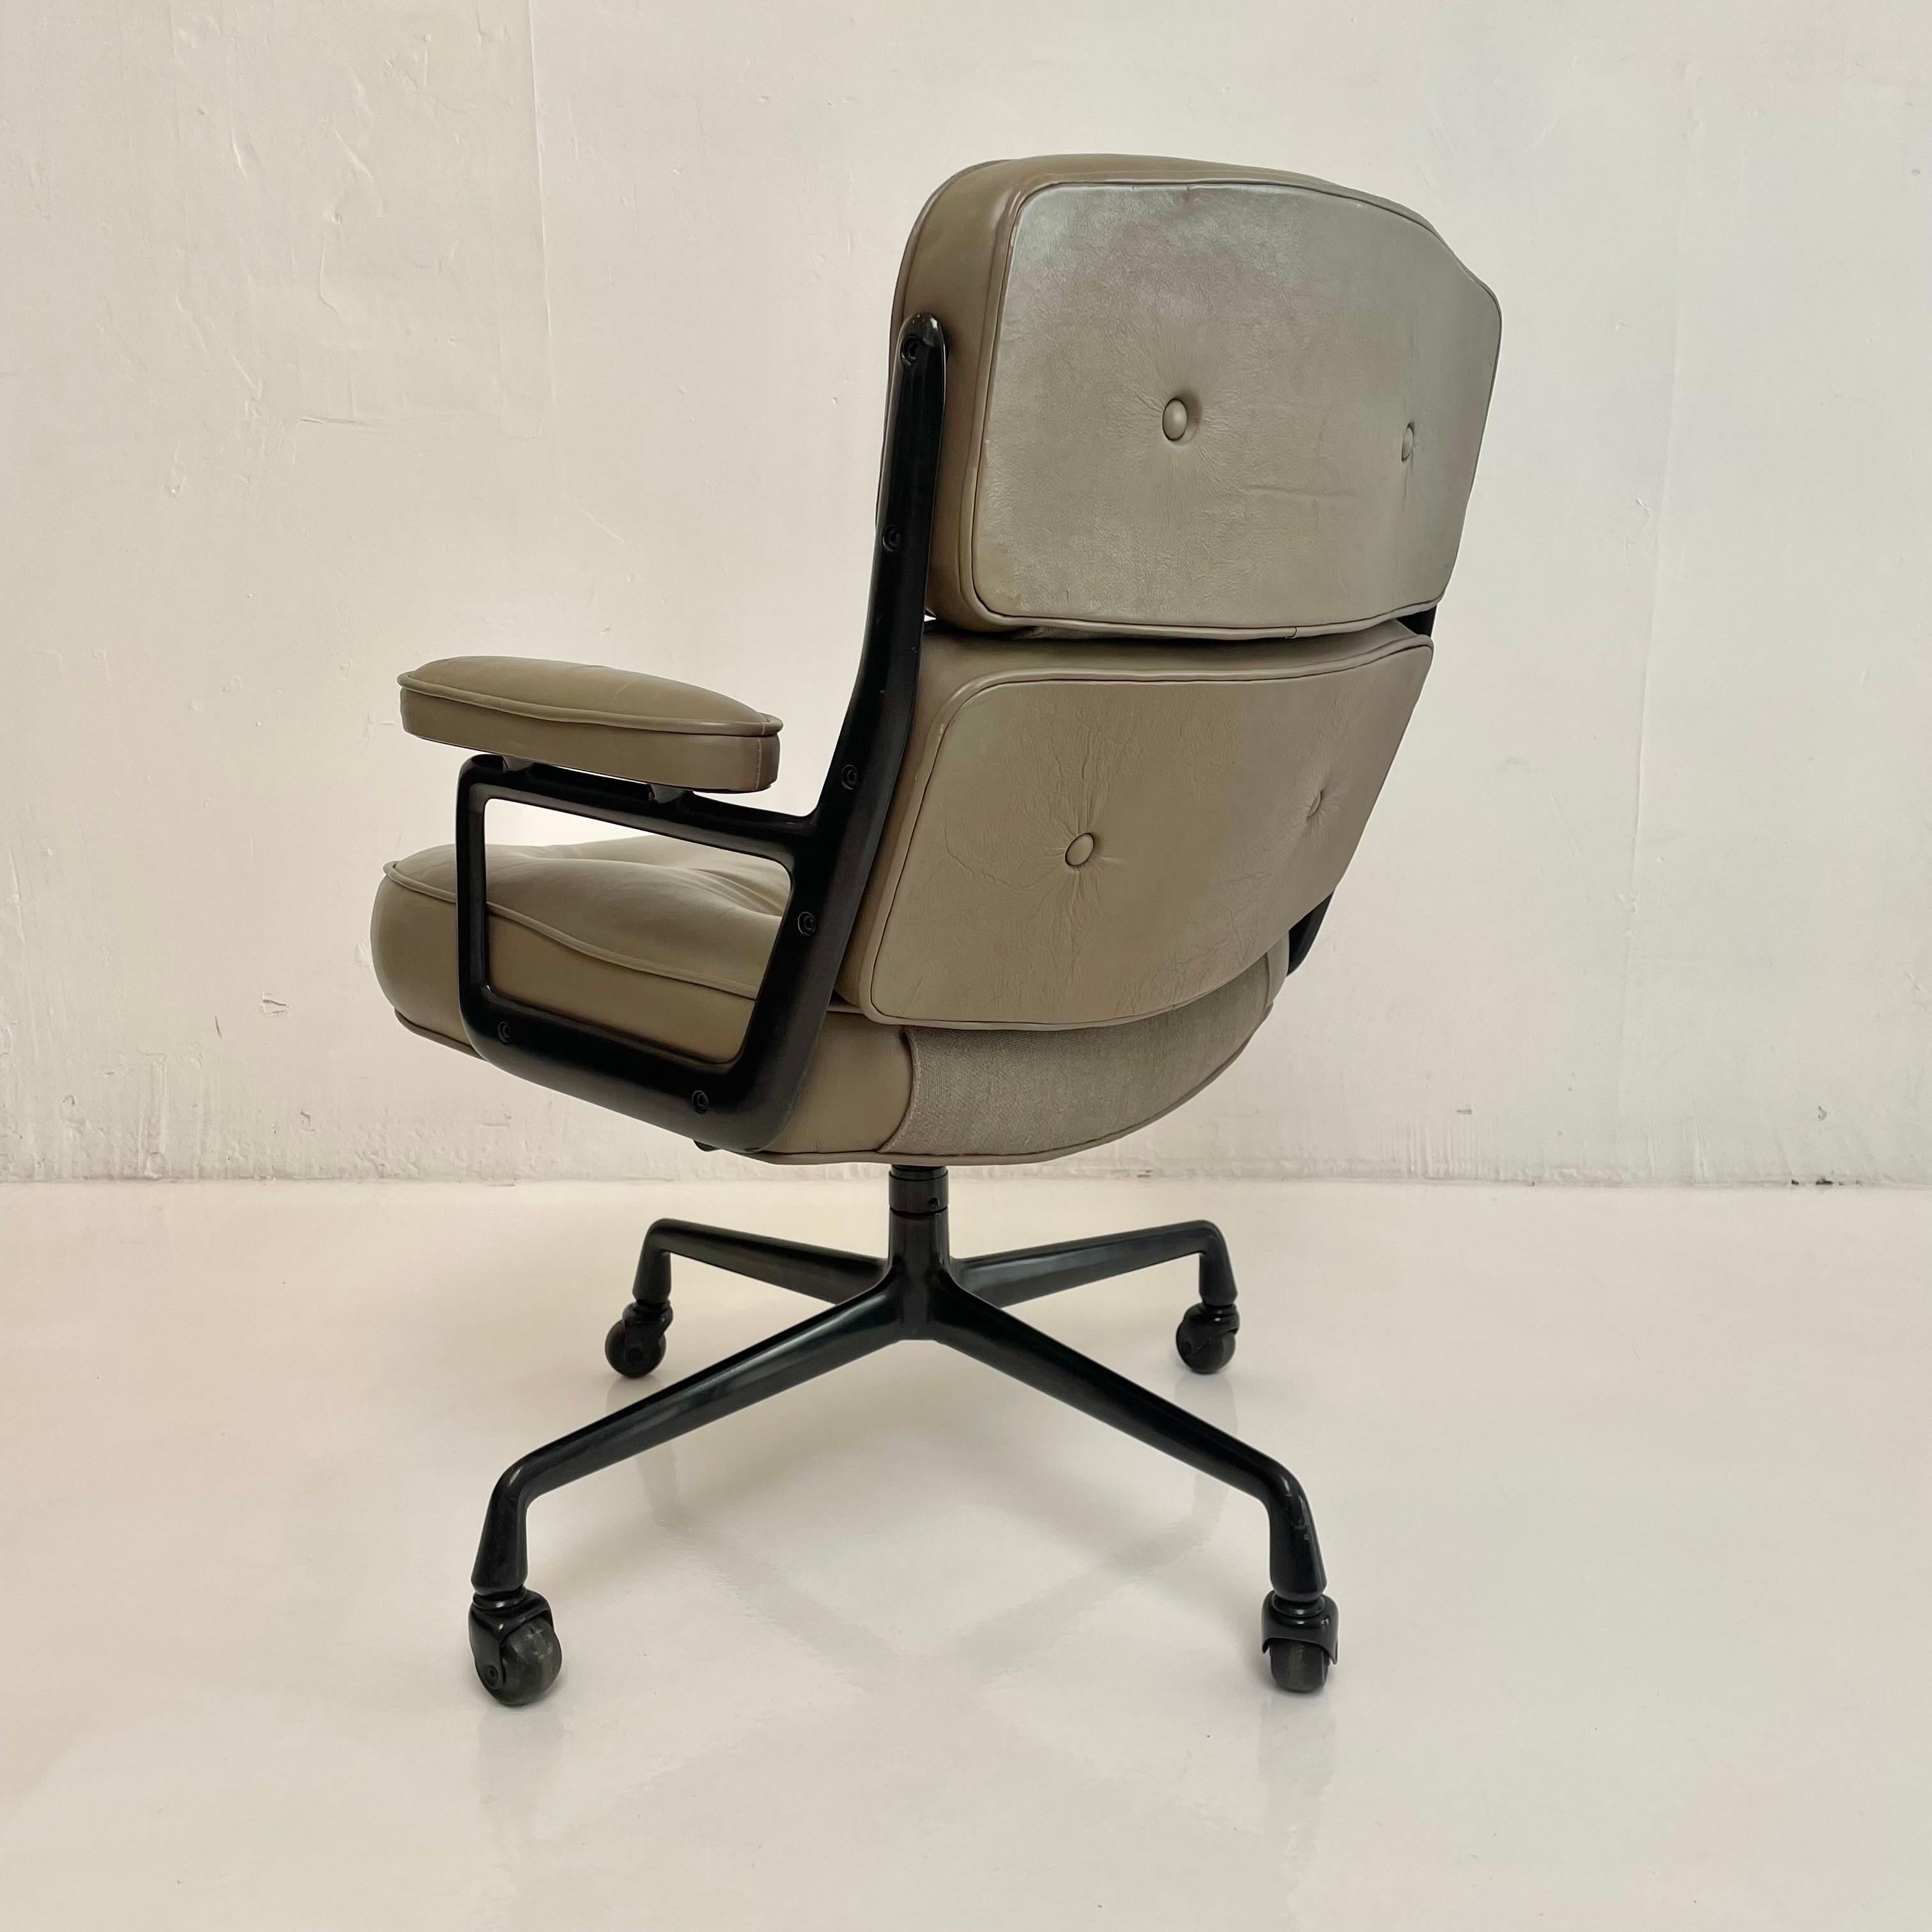 Aluminum Eames Time Life Chair in Olive Leather for Herman Miller, c. 1984 USA